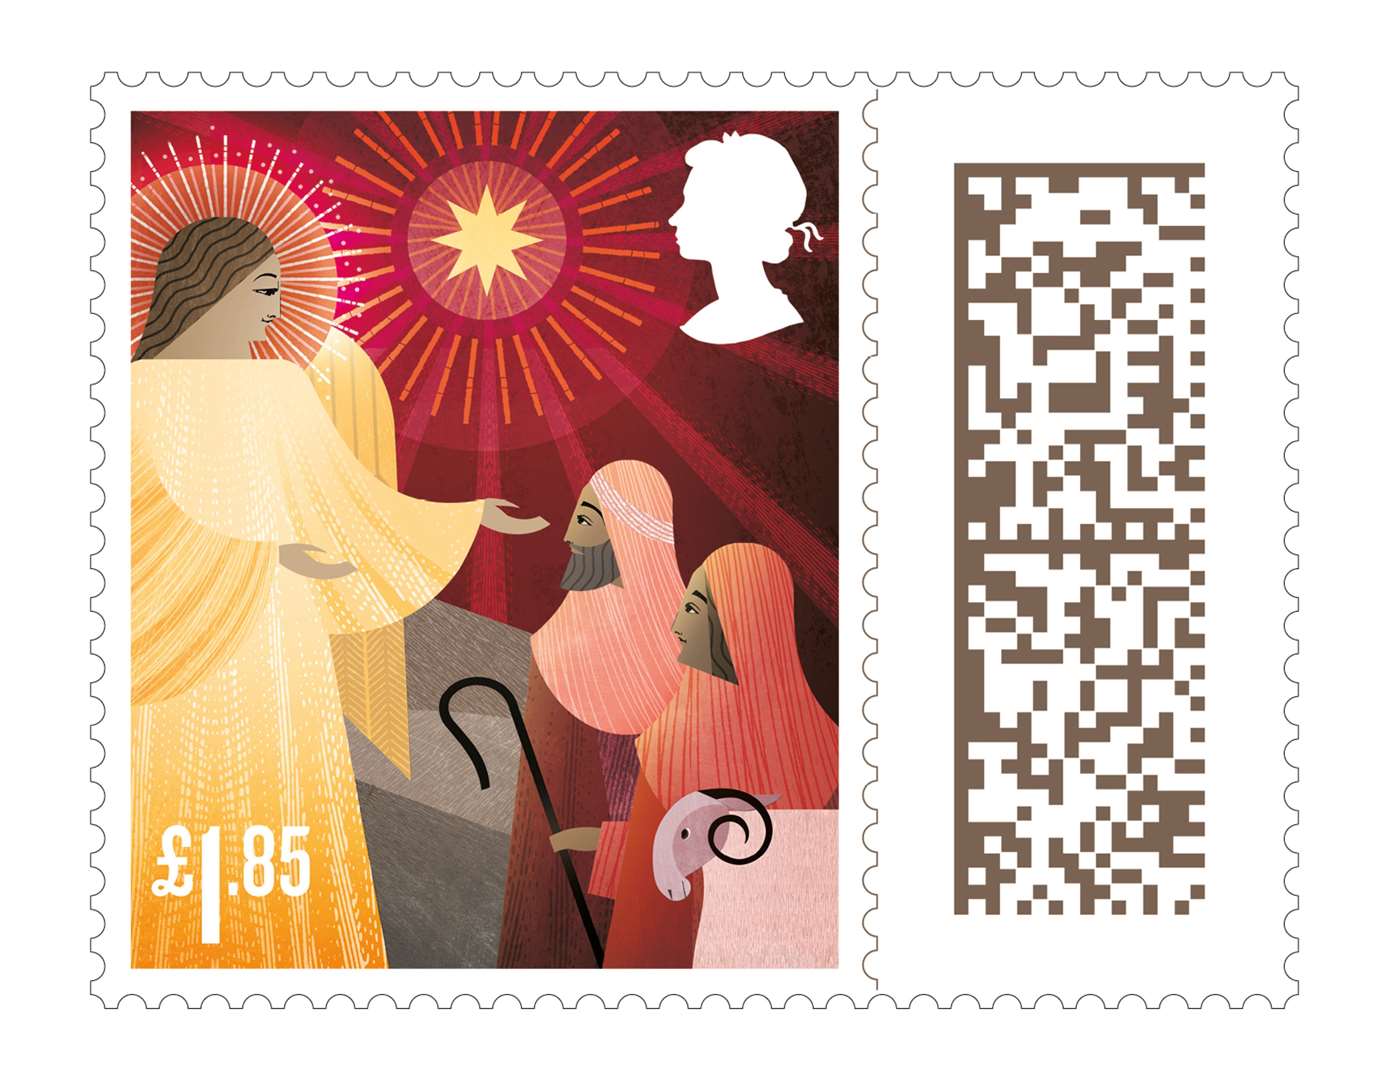 The stamps, designed by artist Katie Ponder, feature parts of the Nativity story